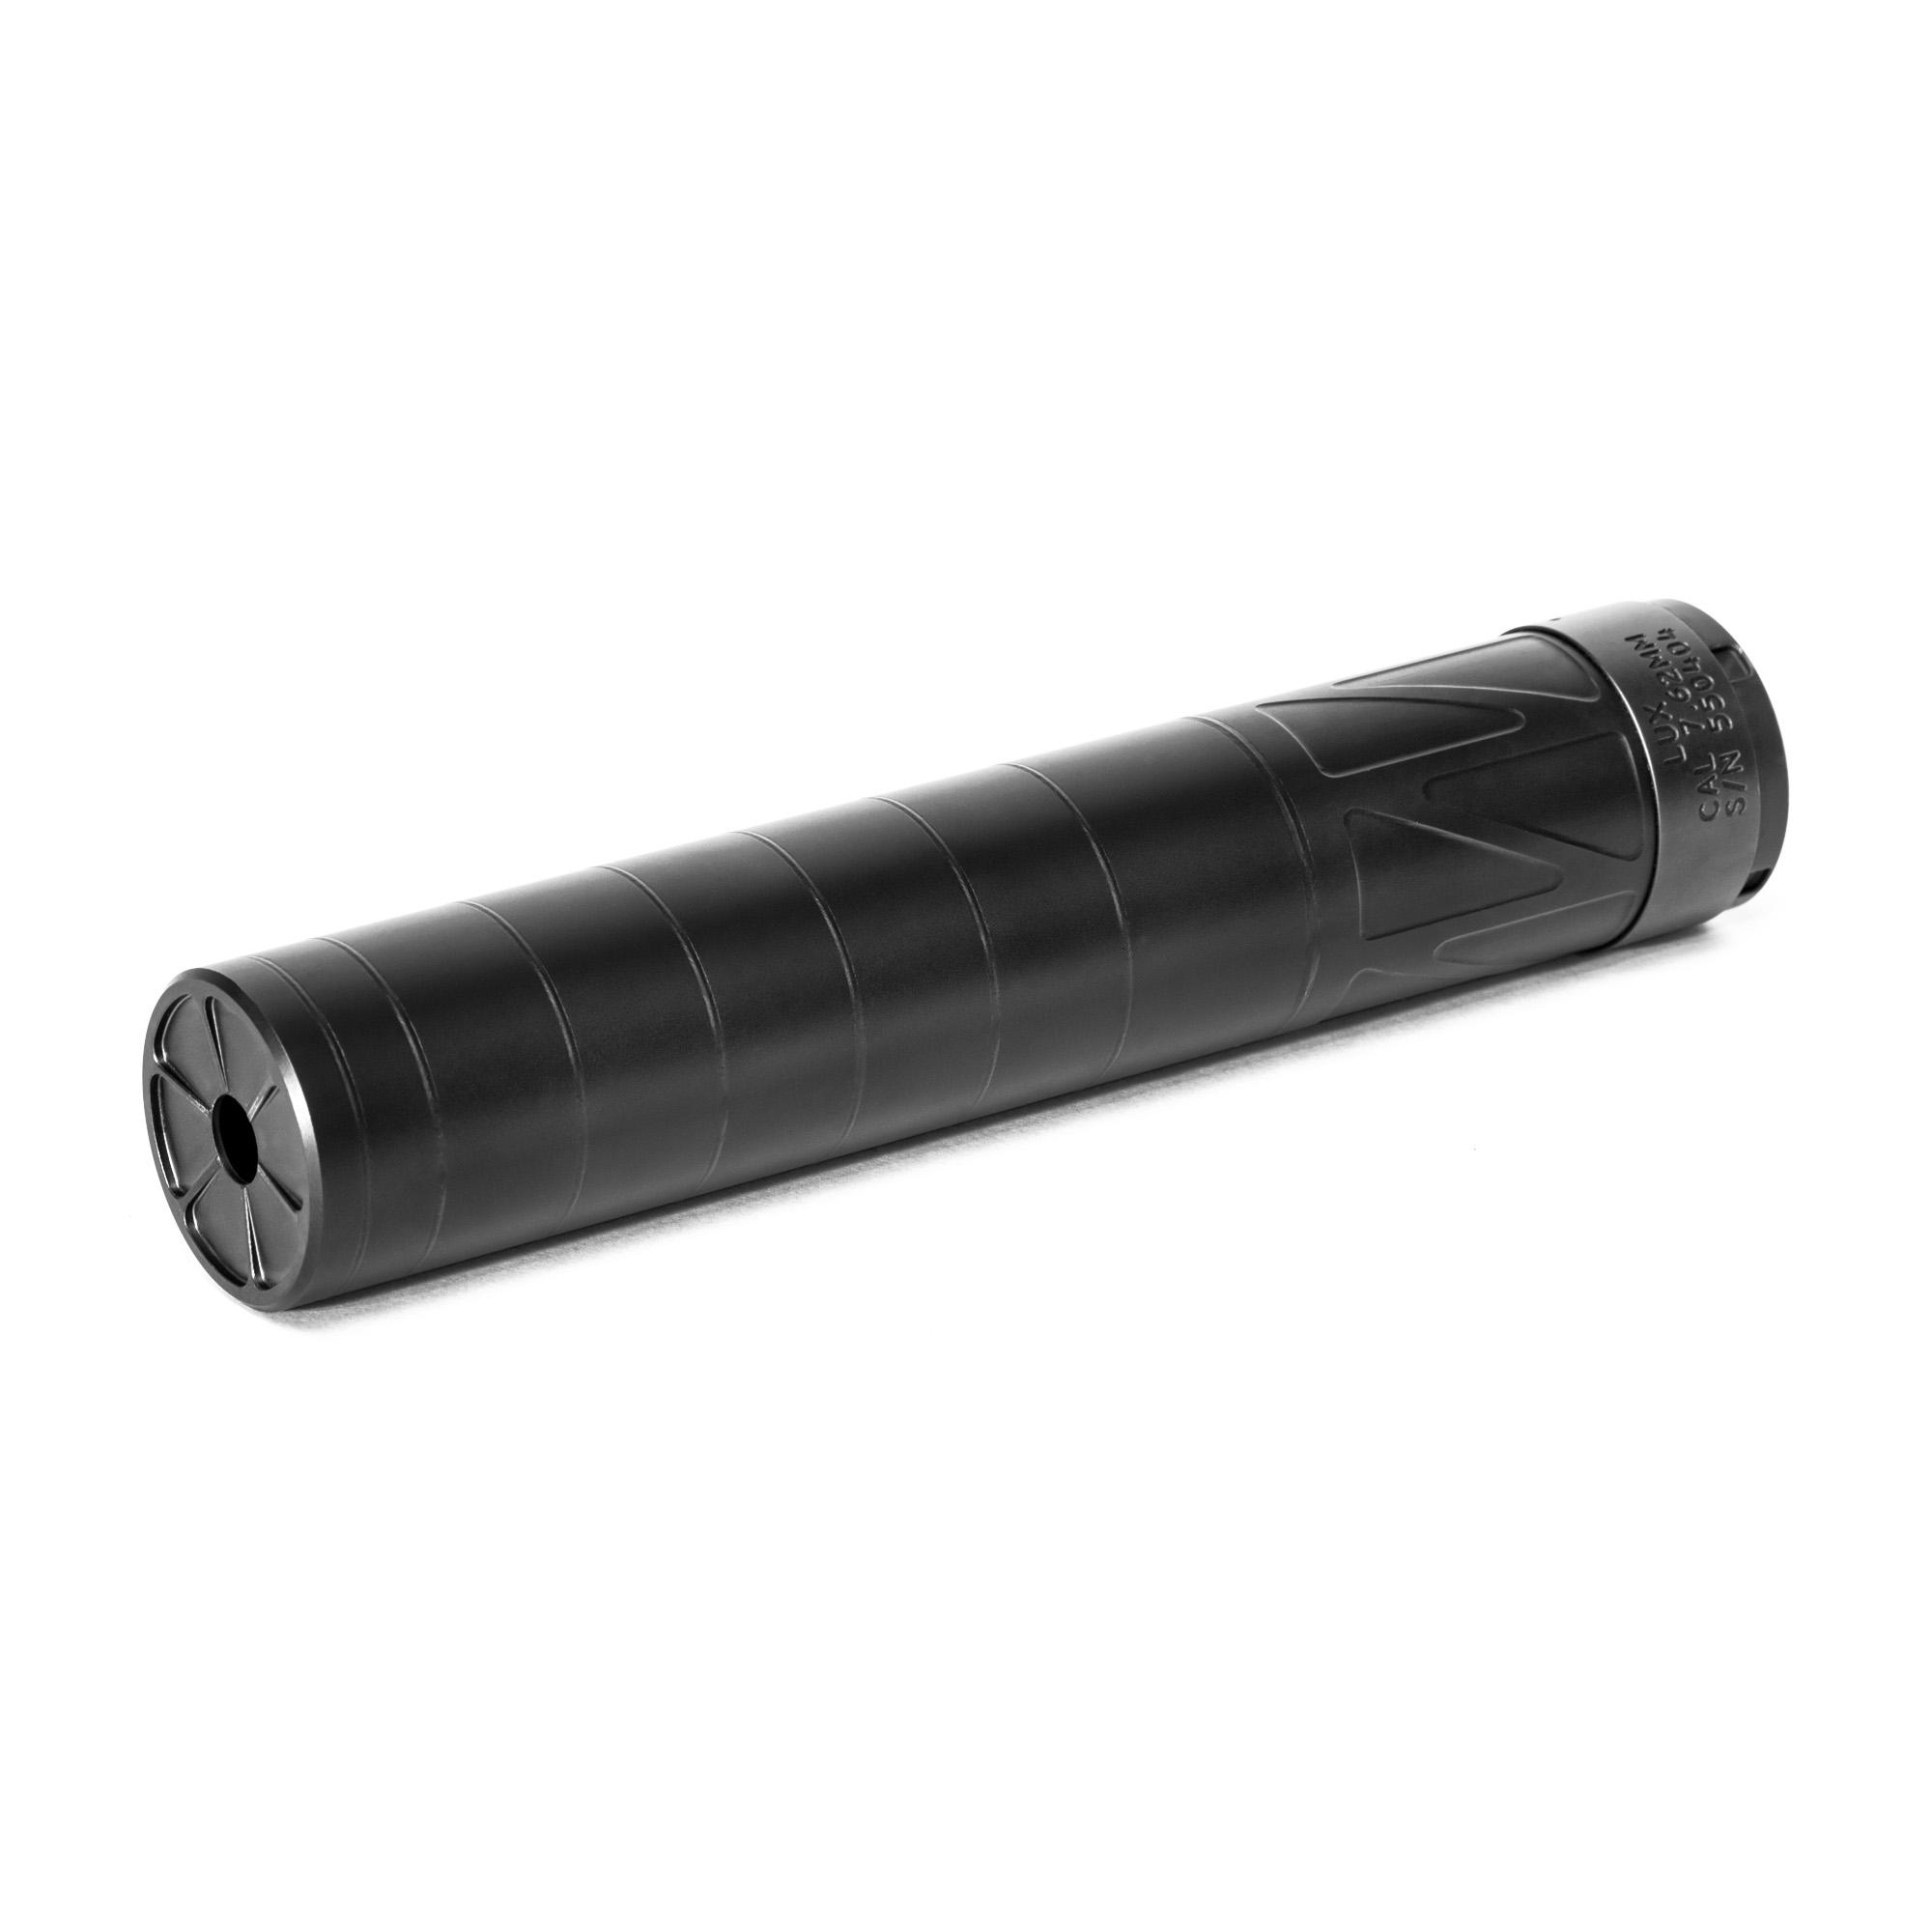 Rifle ENERGETIC LUX SILENCER 6.5MM DRK GRY image 2